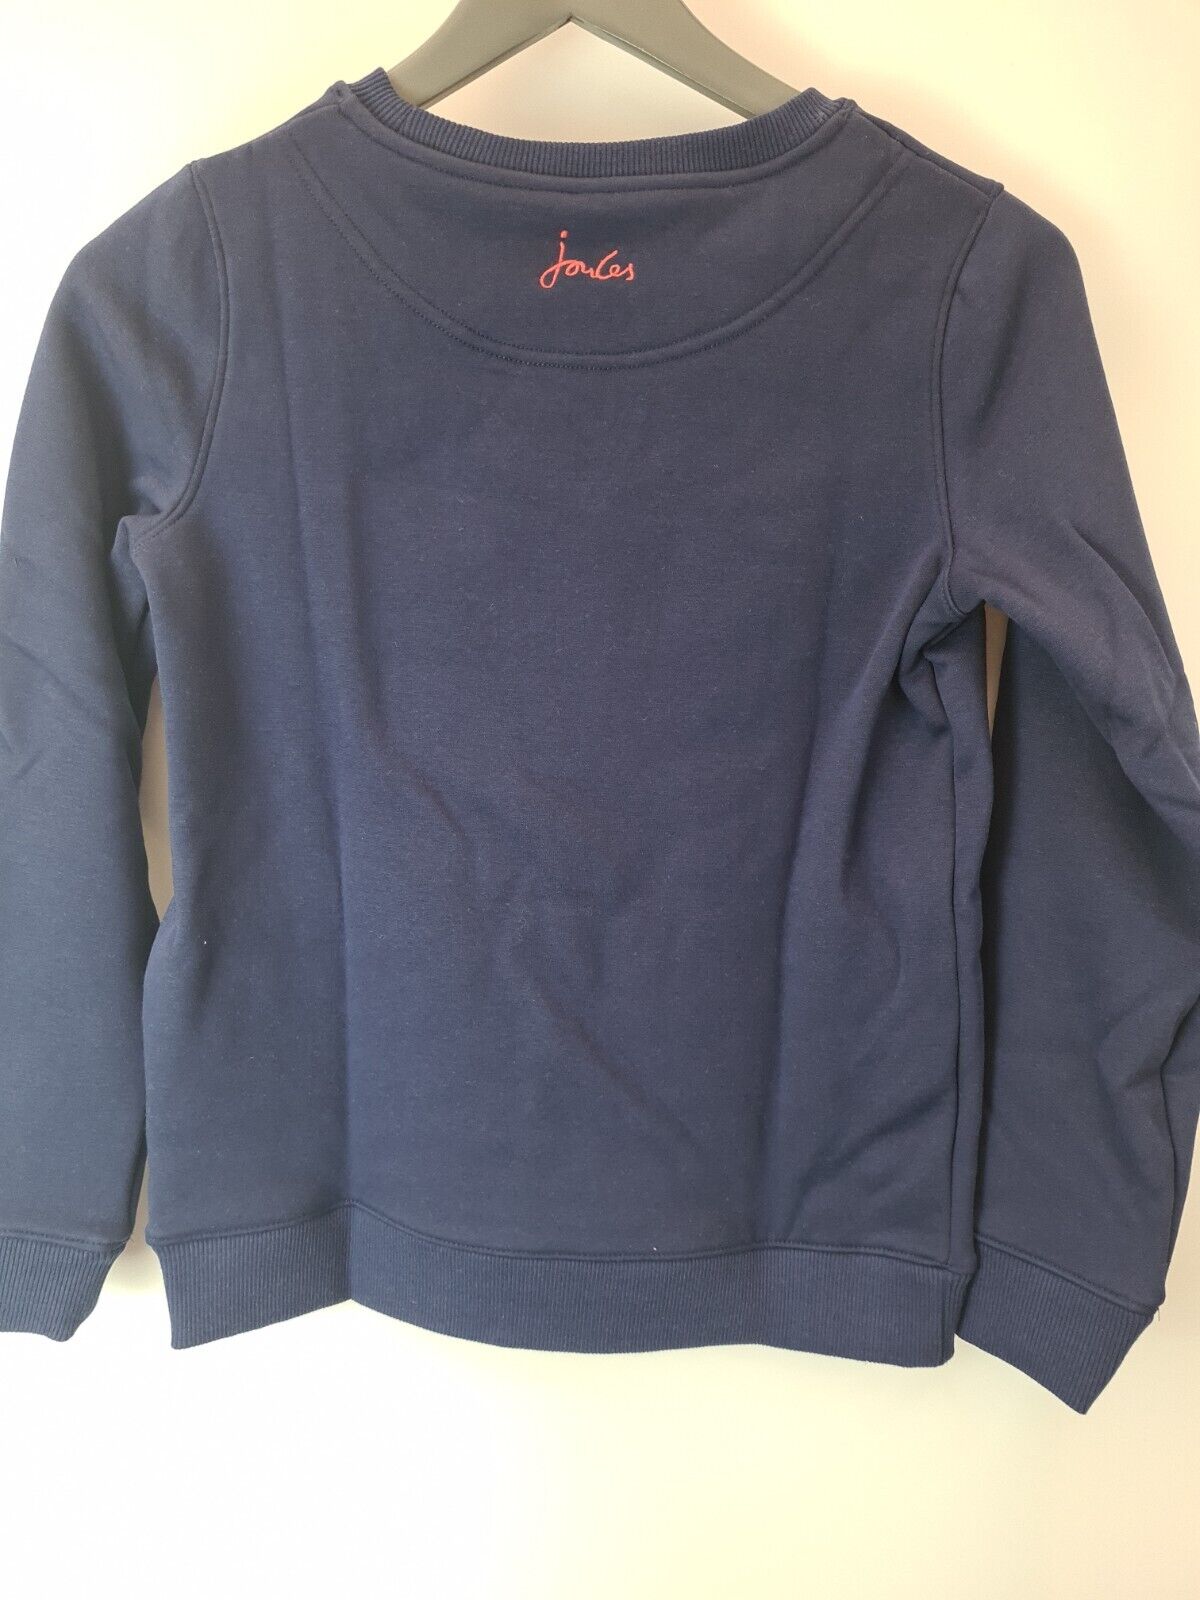 Joules Kids Blue Unicorn And Stars Jumper Size 8 Years **** V148